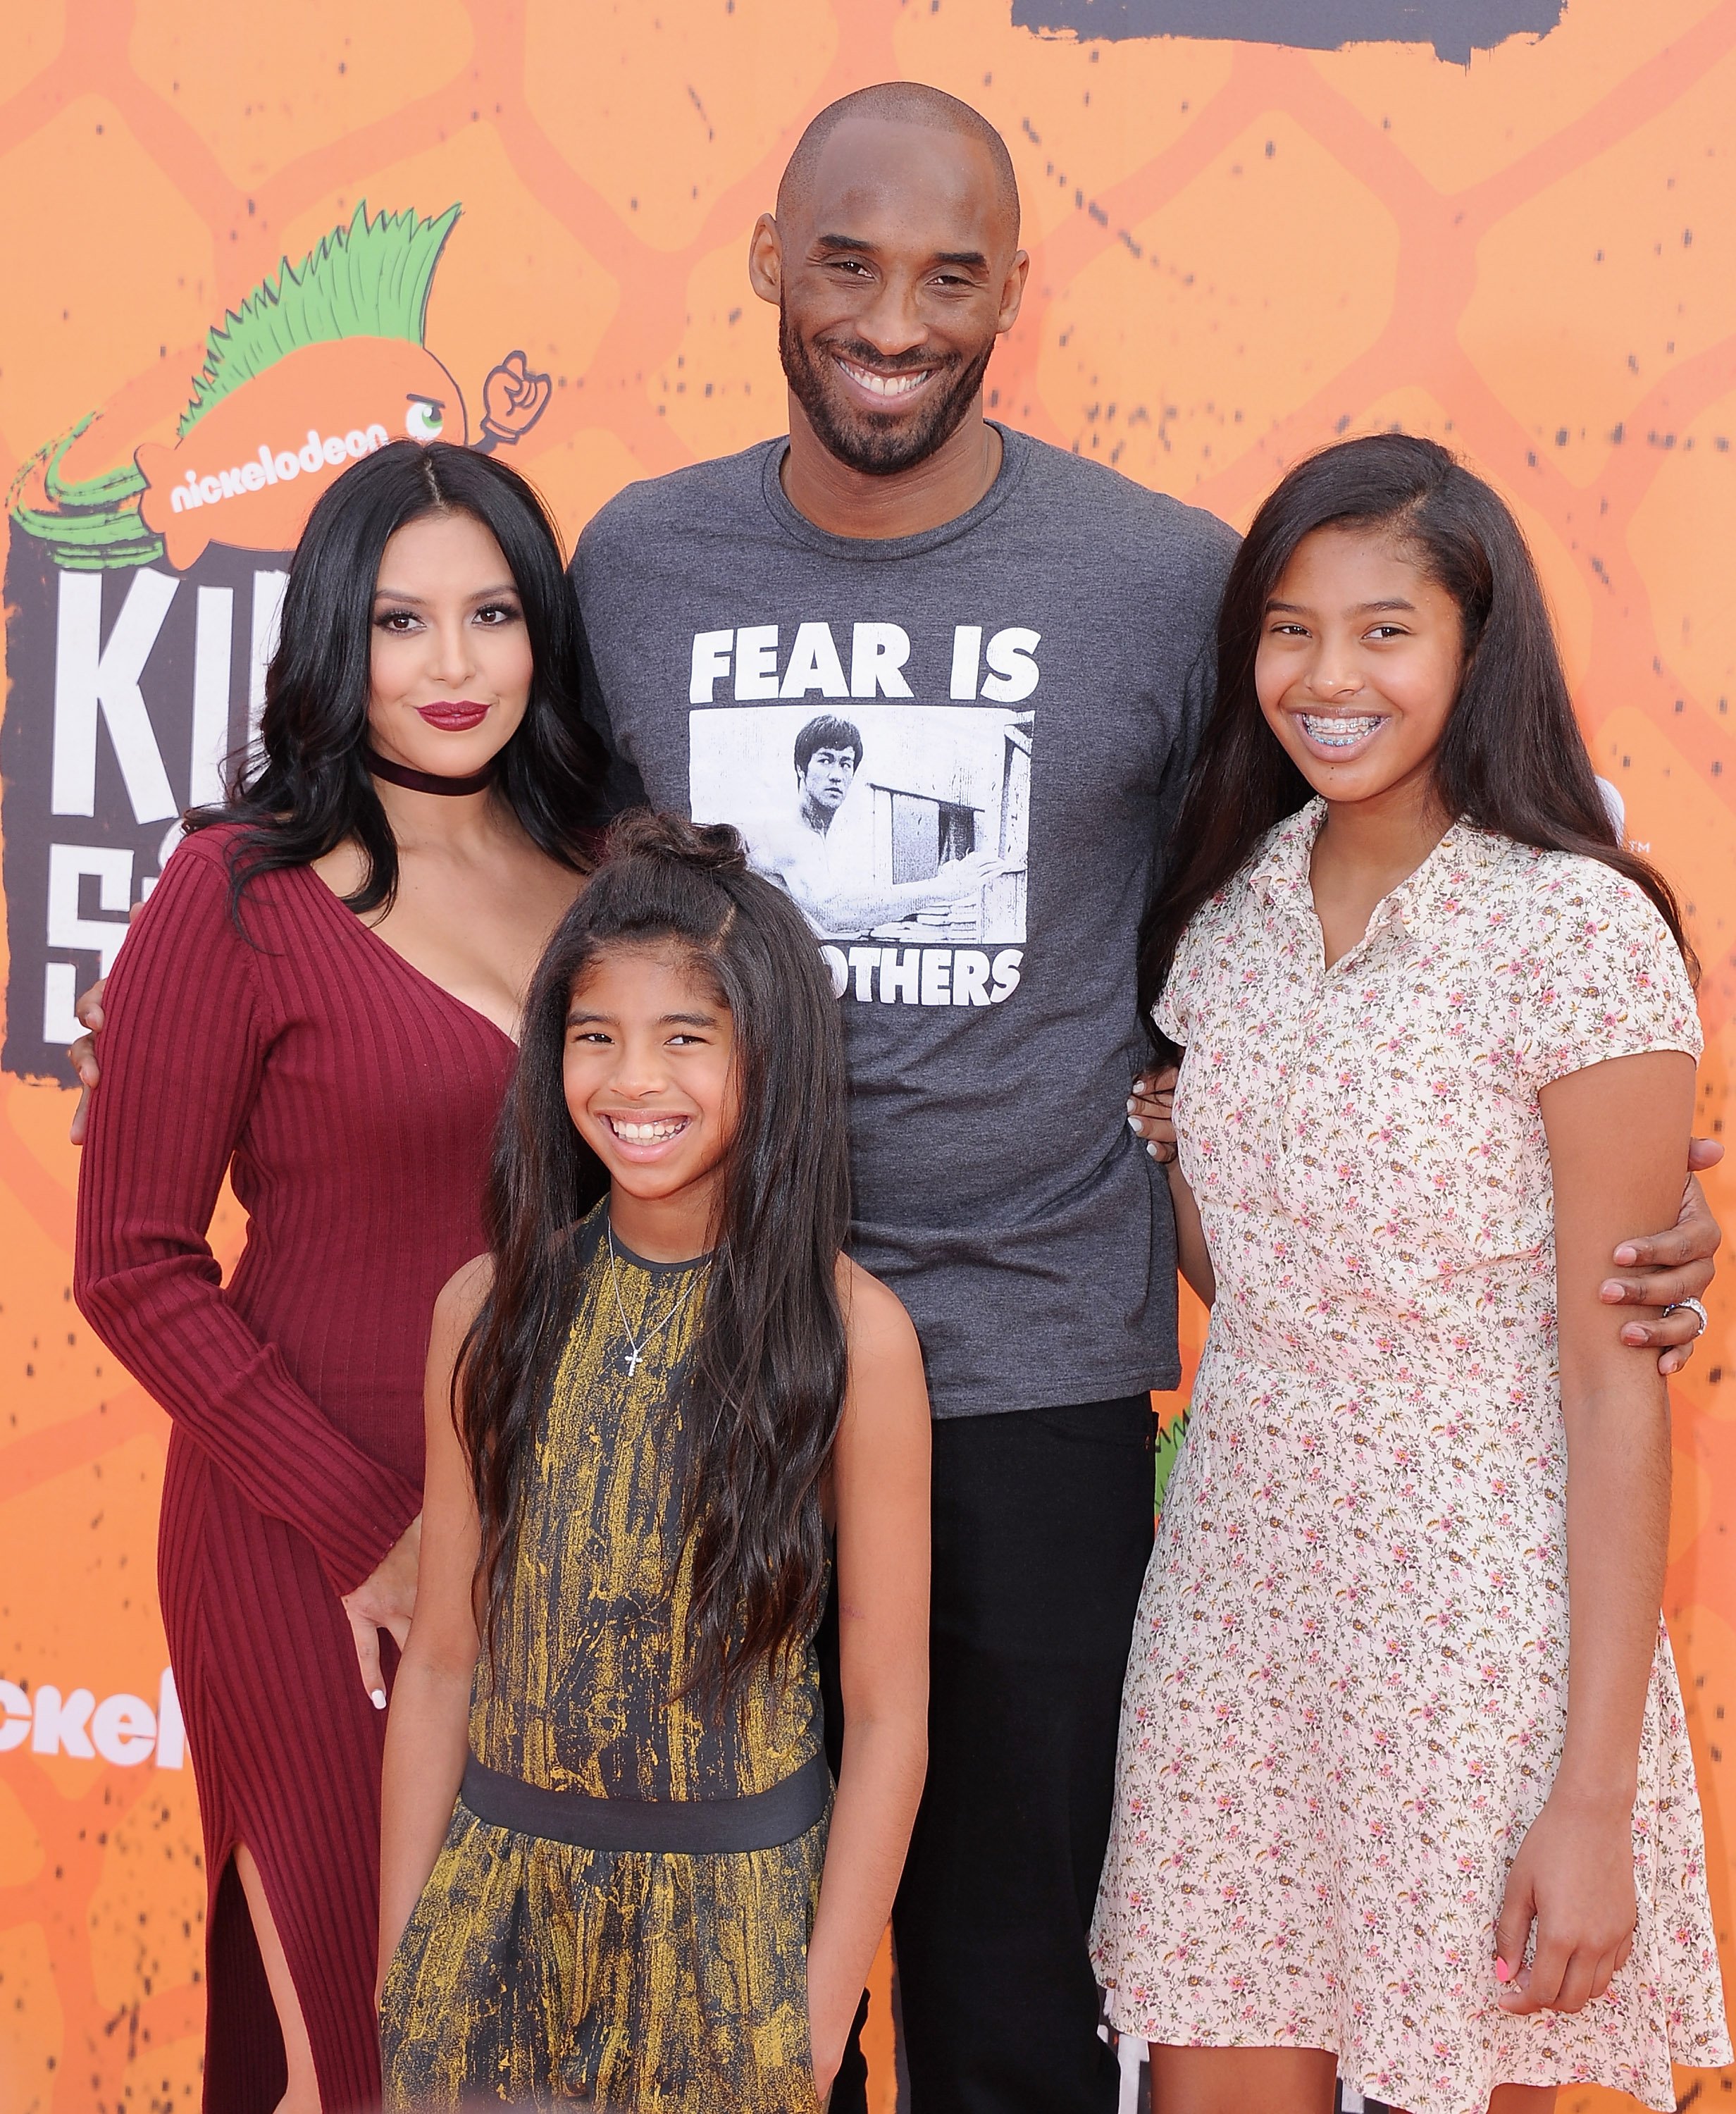  Kobe Bryant and his wife, Vanessa, along with their daughters, Gianna and Natalia, at Nickelodeon Kids' Choice Sports Awards on July 14, 2016. | Source: Getty Images